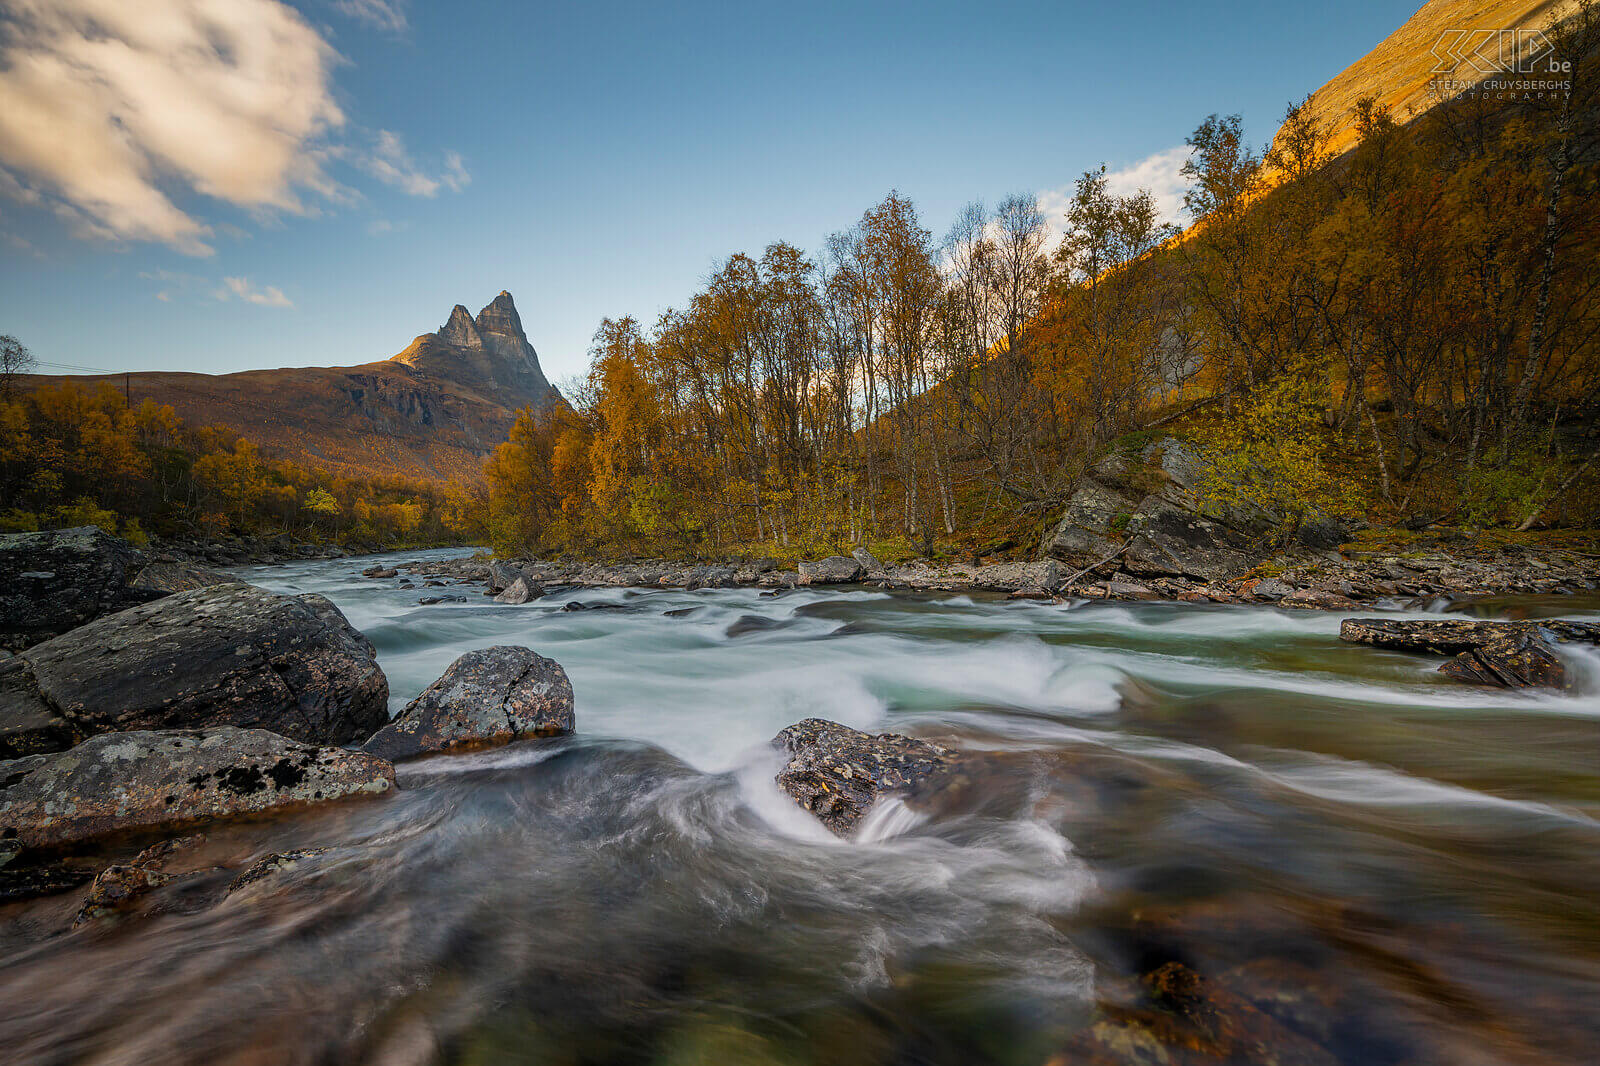 Norway - Oteren - Otertinden - Signaldalelva Autumn at its best at the Signaldalelva river with the mountain peaks of the Otertinden. Stefan Cruysberghs